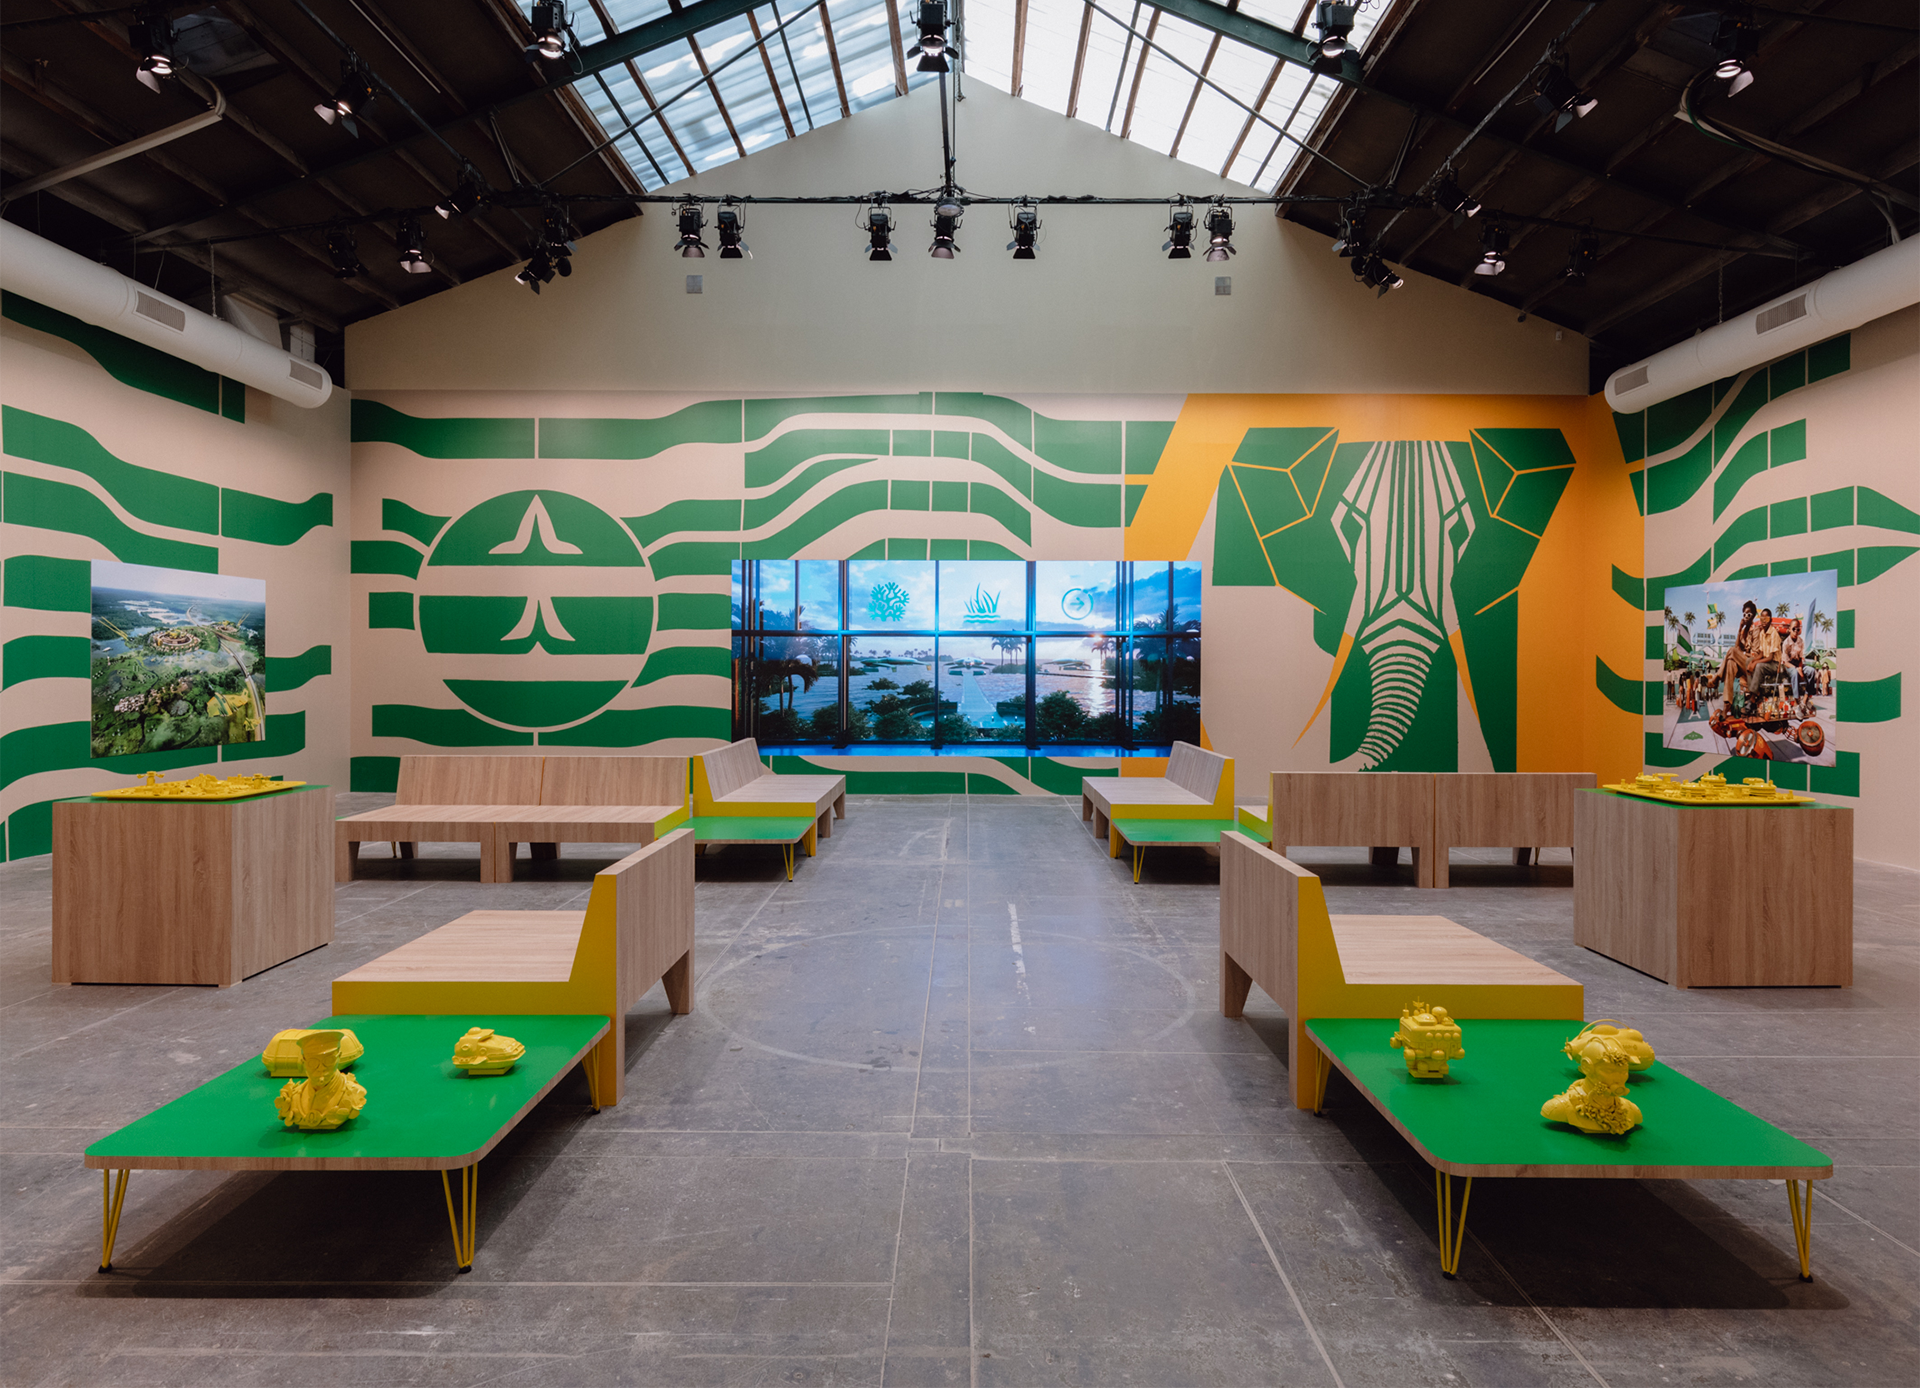 Fictional waiting lounge featuring bright green tables, yellow sculptures, and hung travel posters